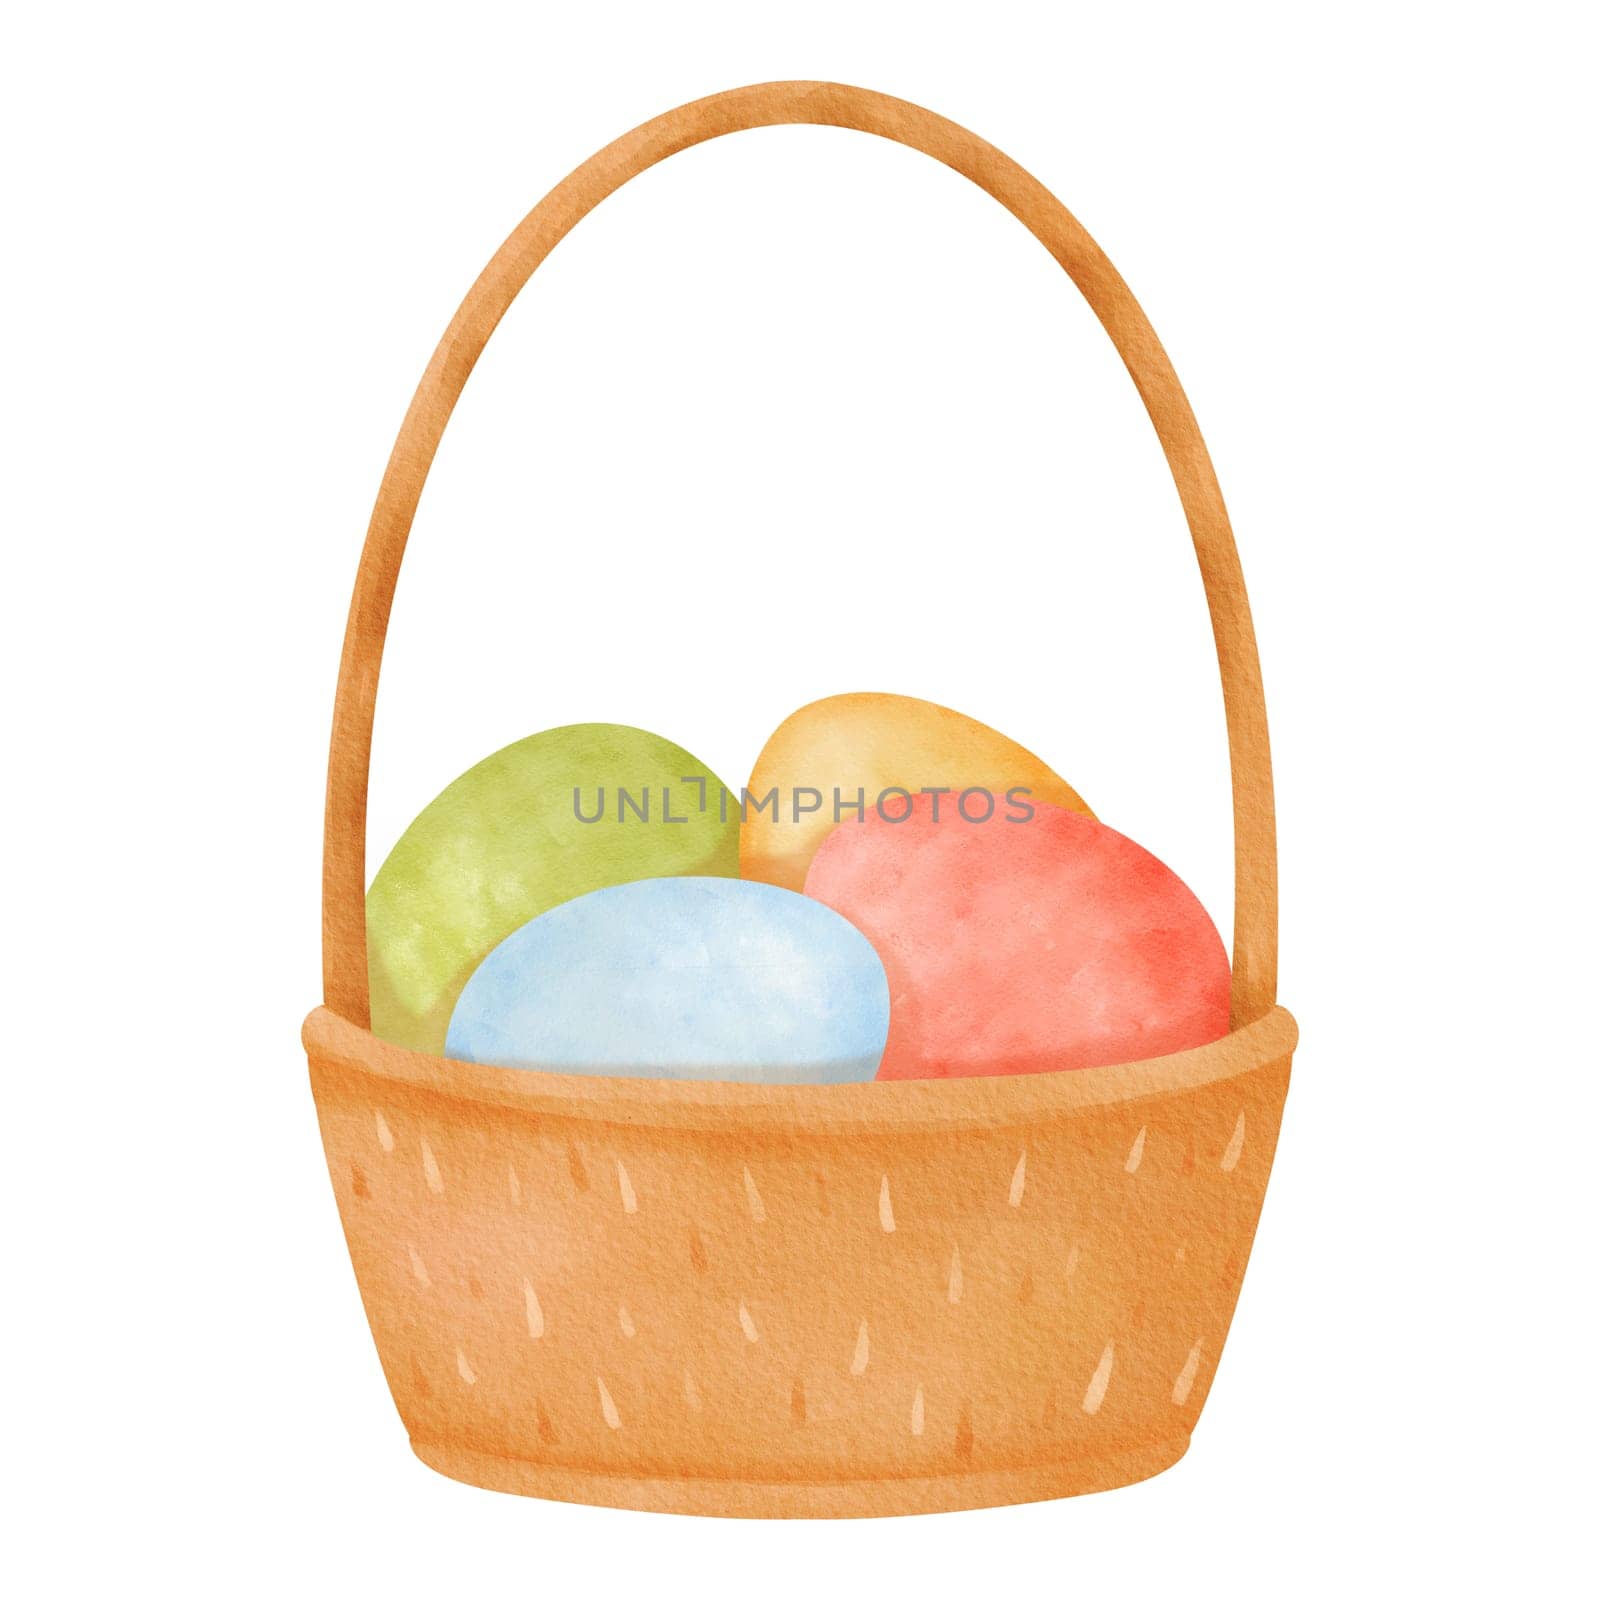 Cartoon-style wooden basket with a tall handle. Woven crate filled with colorful Easter eggs. Dyed chicken eggs symbolizing spring. Eco-friendly product. Watercolor isolated illustration.